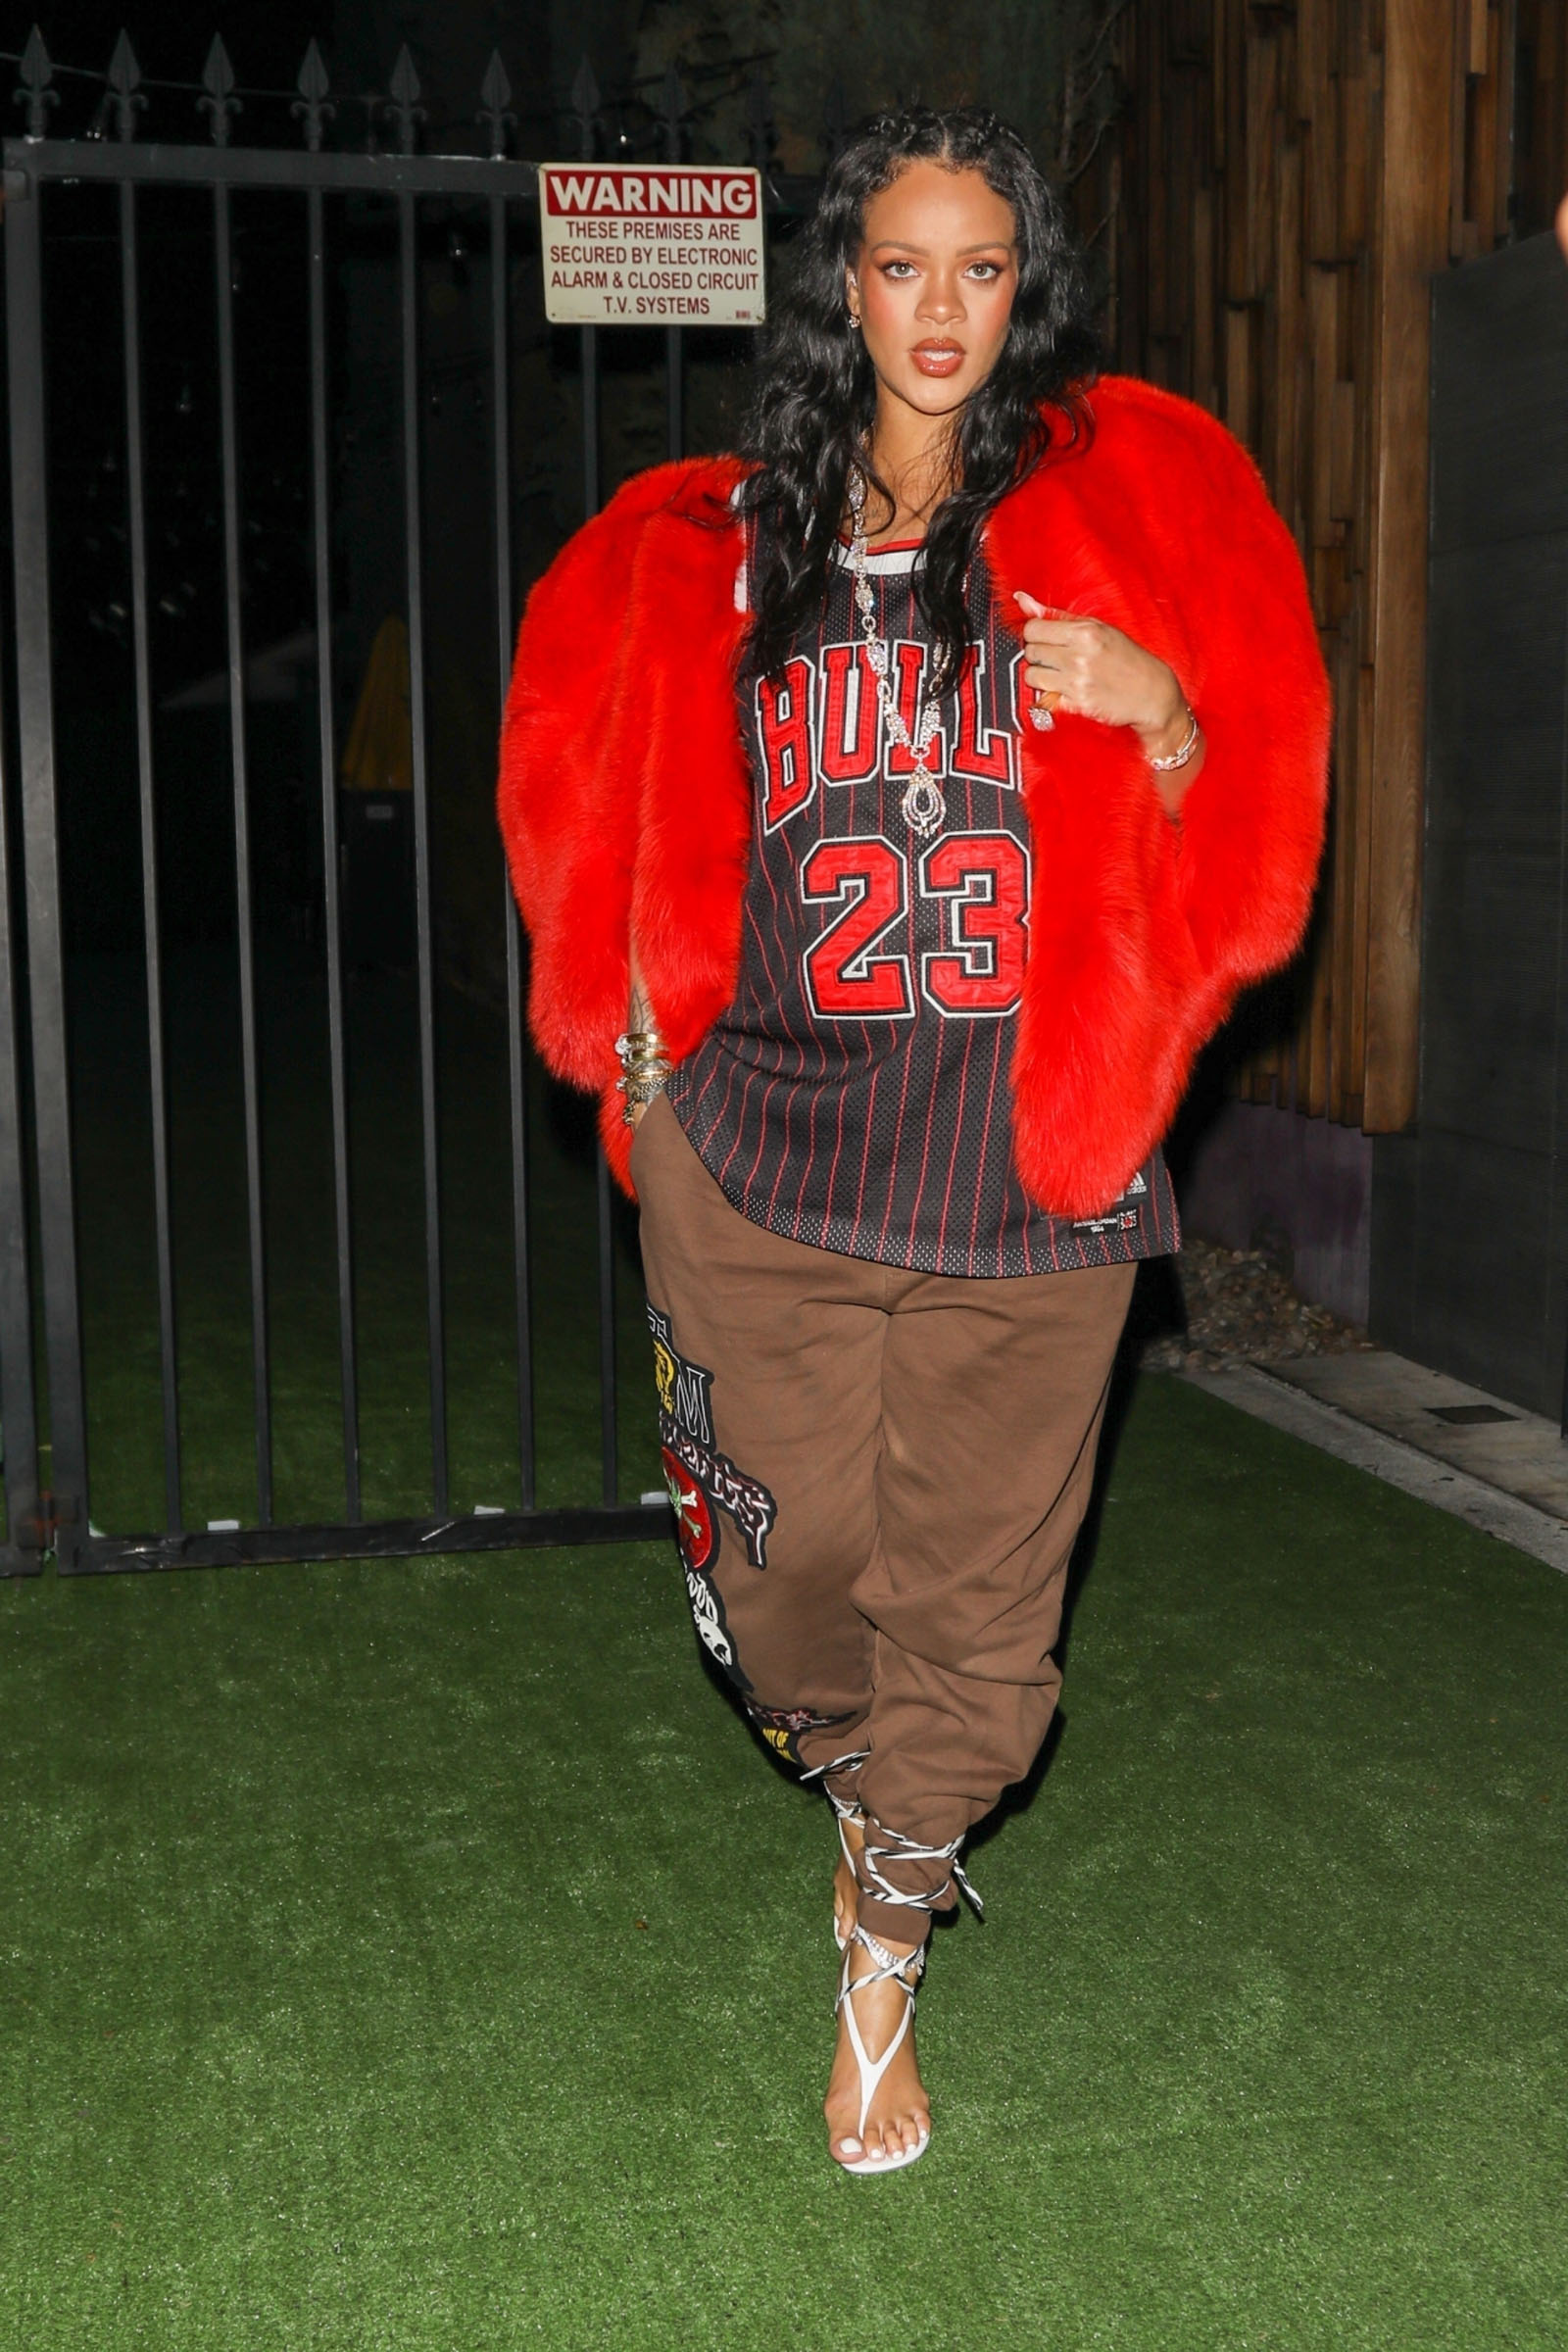 *EXCLUSIVE* Pregnant Rihanna sports a Chicago Bulls jersey while out for dinner